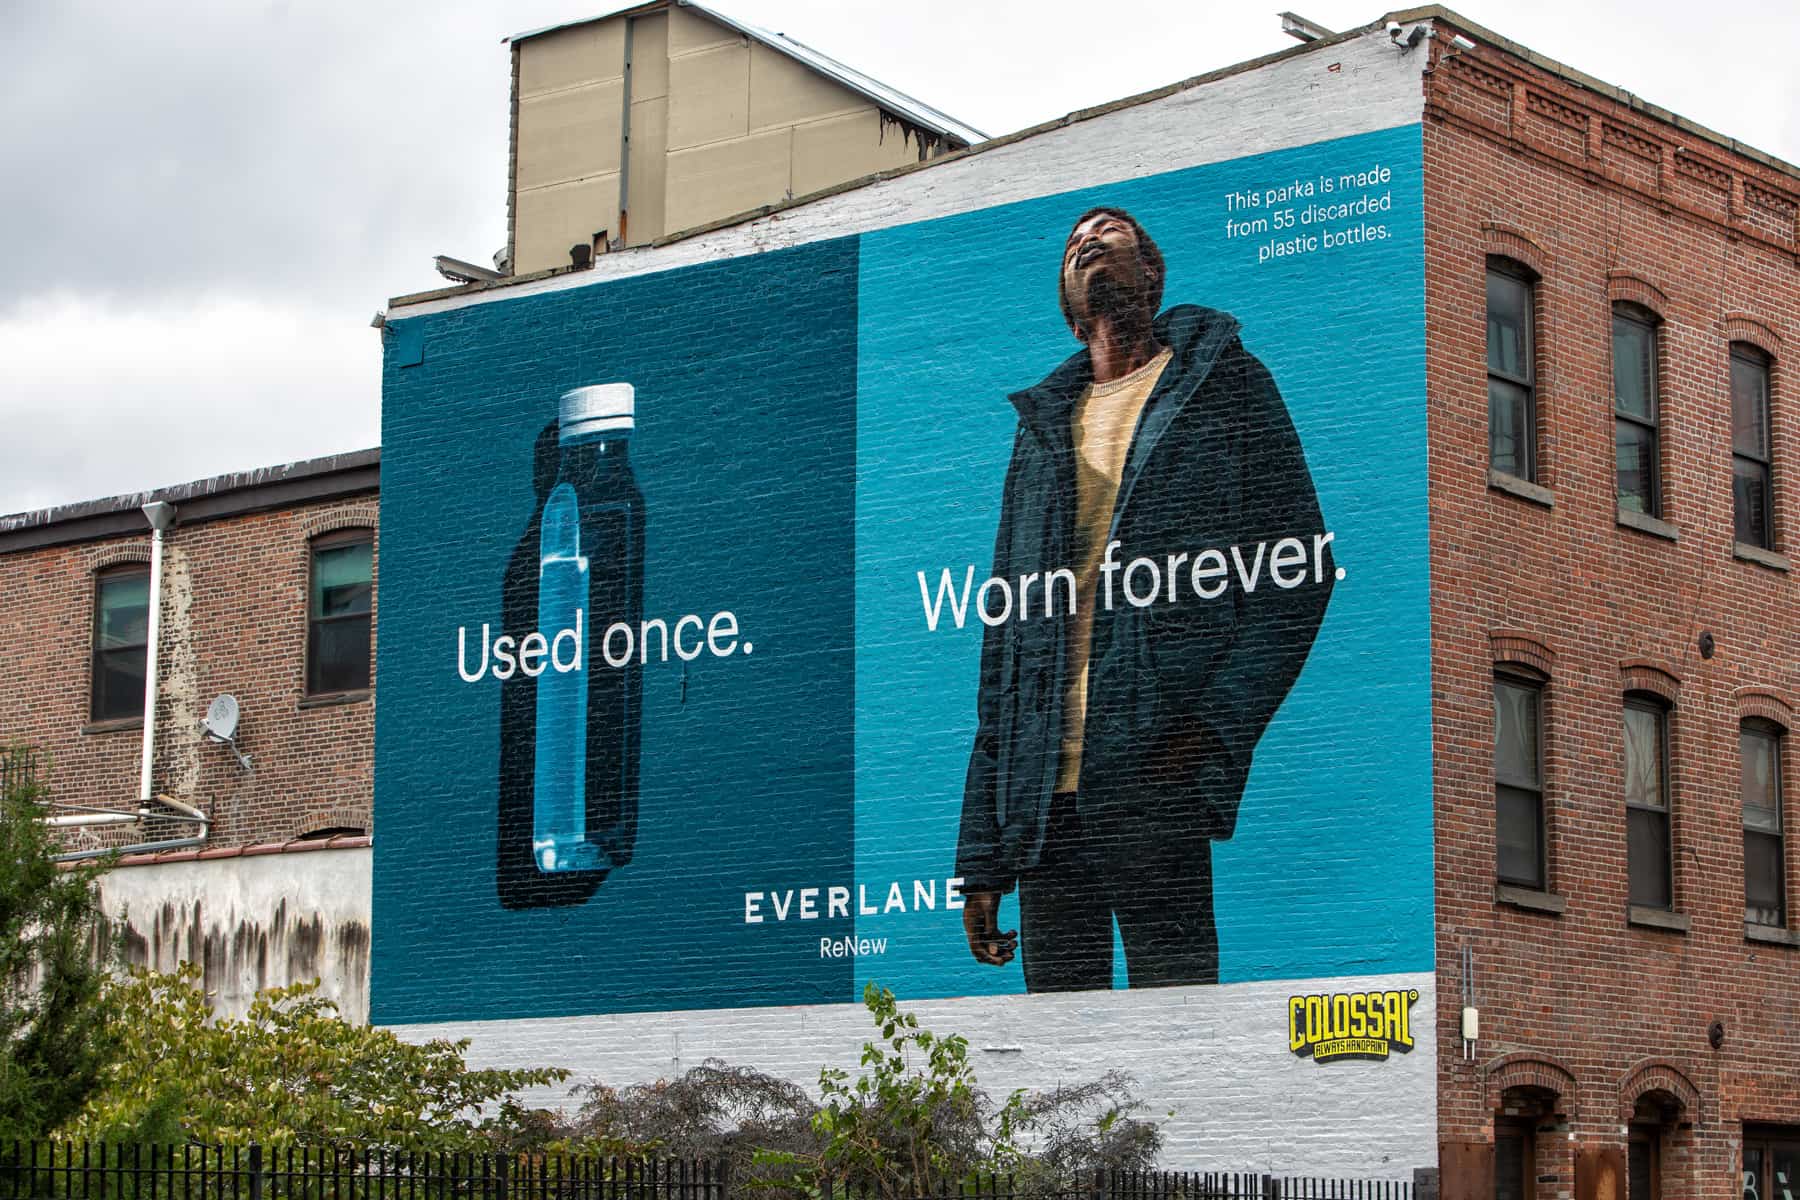 An ad for Everlane highlighting the environmental impact of using recycled plastic in their clothing Photo by Kasia Bedkowski